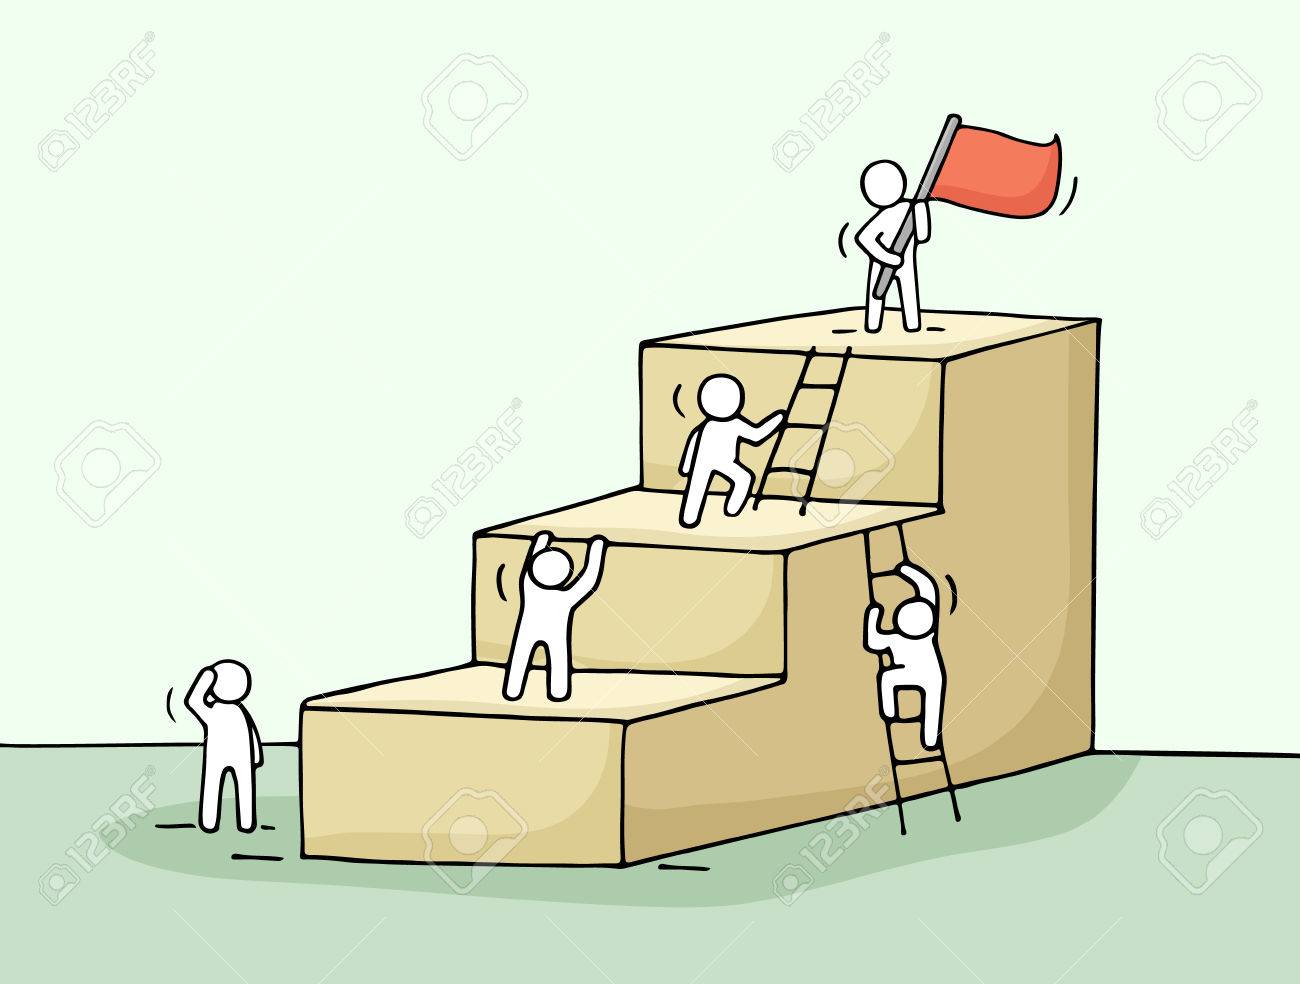 63718104-sketch-of-career-ladder-with-climbing-little-people-doodle-cute-miniature-of-stairs-with-leader-on-t.jpg